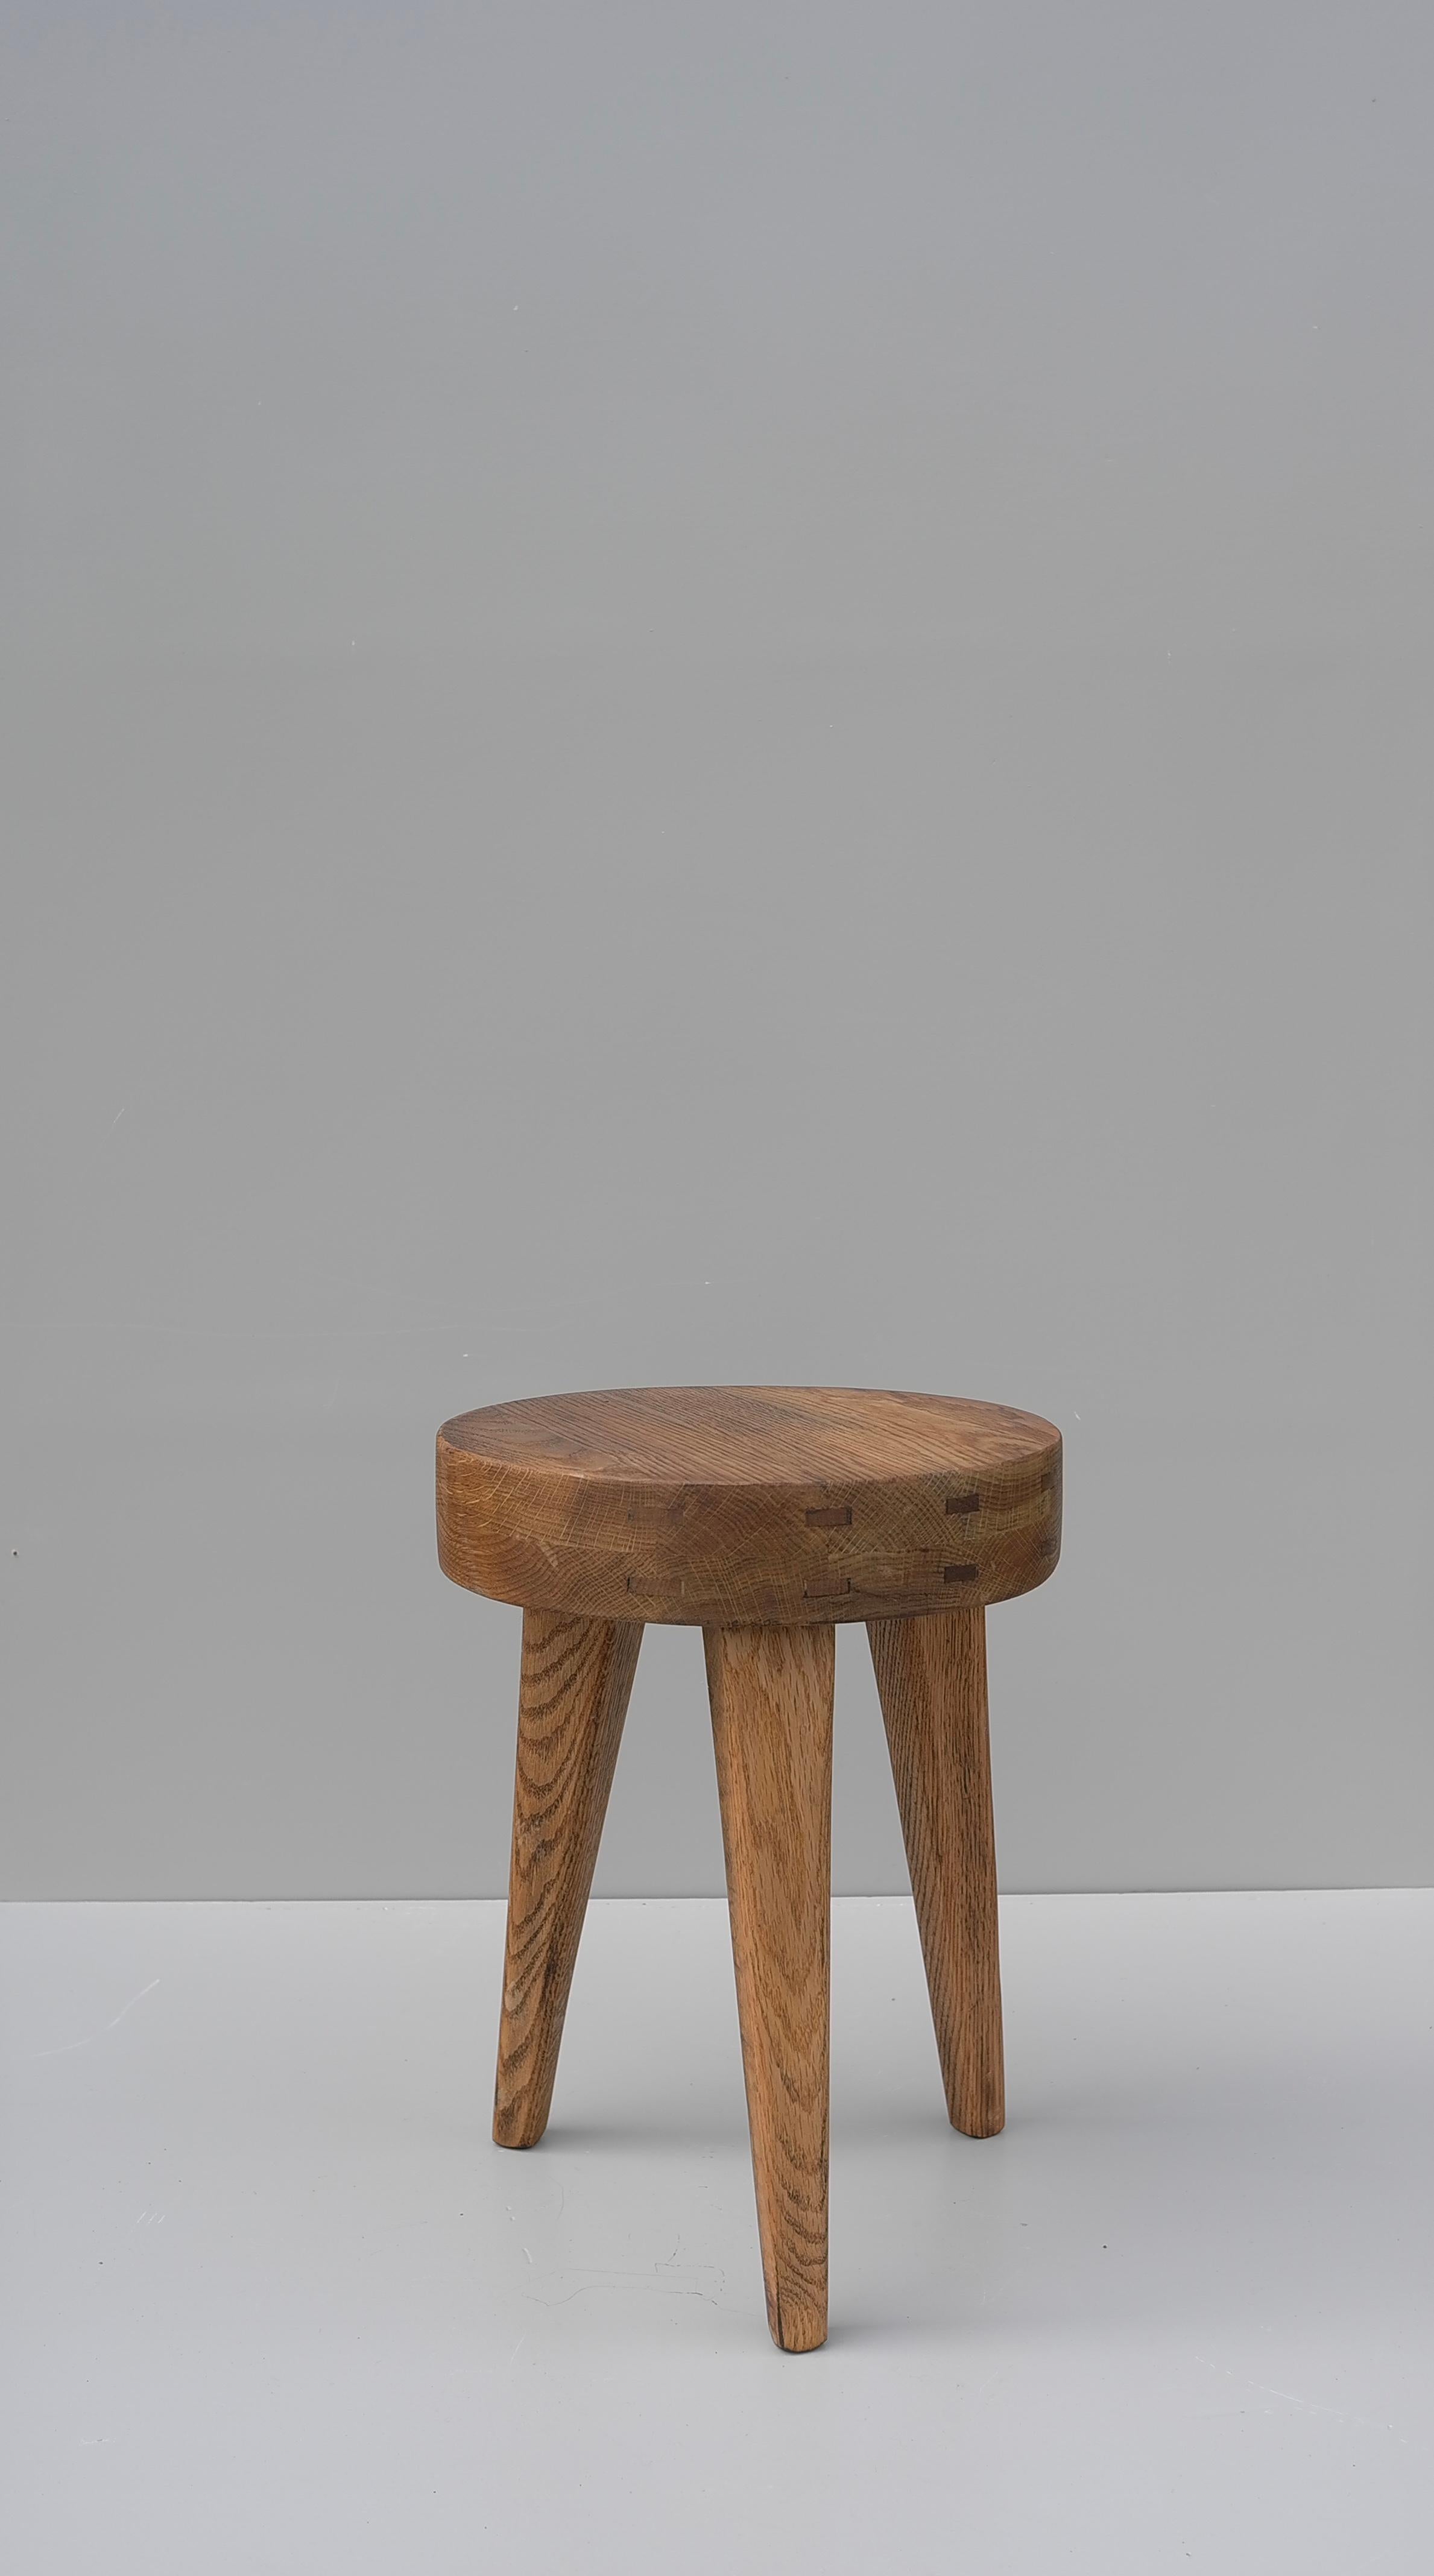 Mid-20th Century Solid Oak Mid-Century Modern Craftsman Stool, France 1960's For Sale